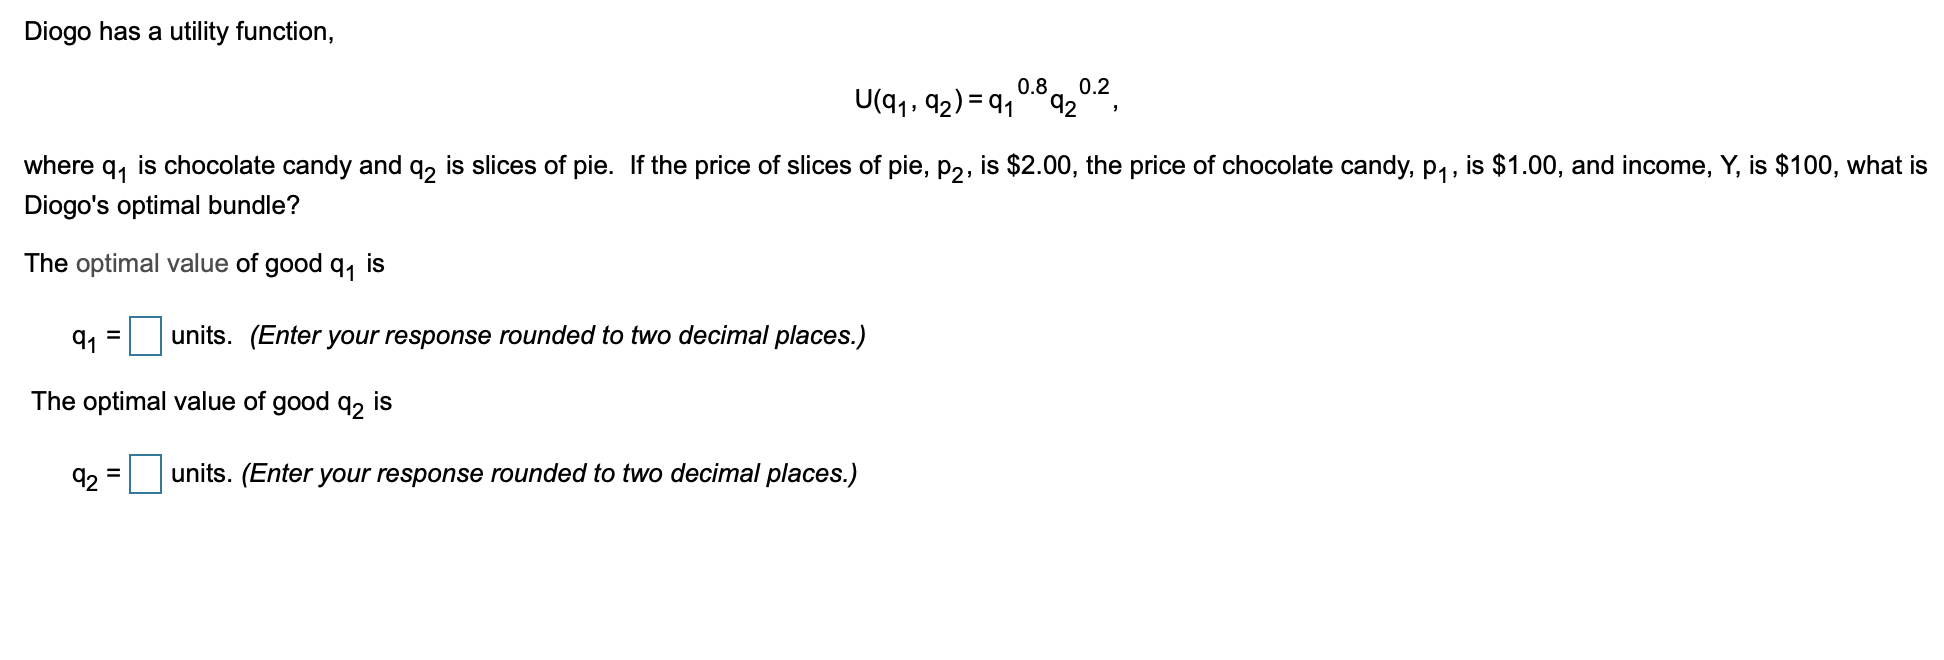 Diogo has a utility function,
U(q1, 92) = 91
0.8
0.2
92
where
91
is chocolate candy and q, is slices of pie. If the price of slices of pie, p2, is $2.00, the price of chocolate candy, P1, is $1.00, and income, Y, is $100, what is
Diogo's optimal bundle?
The optimal value of good q, is
9, = units. (Enter your response rounded to two decimal places.)
The optimal value of good q, is
92
units. (Enter your response rounded to two decimal places.)
